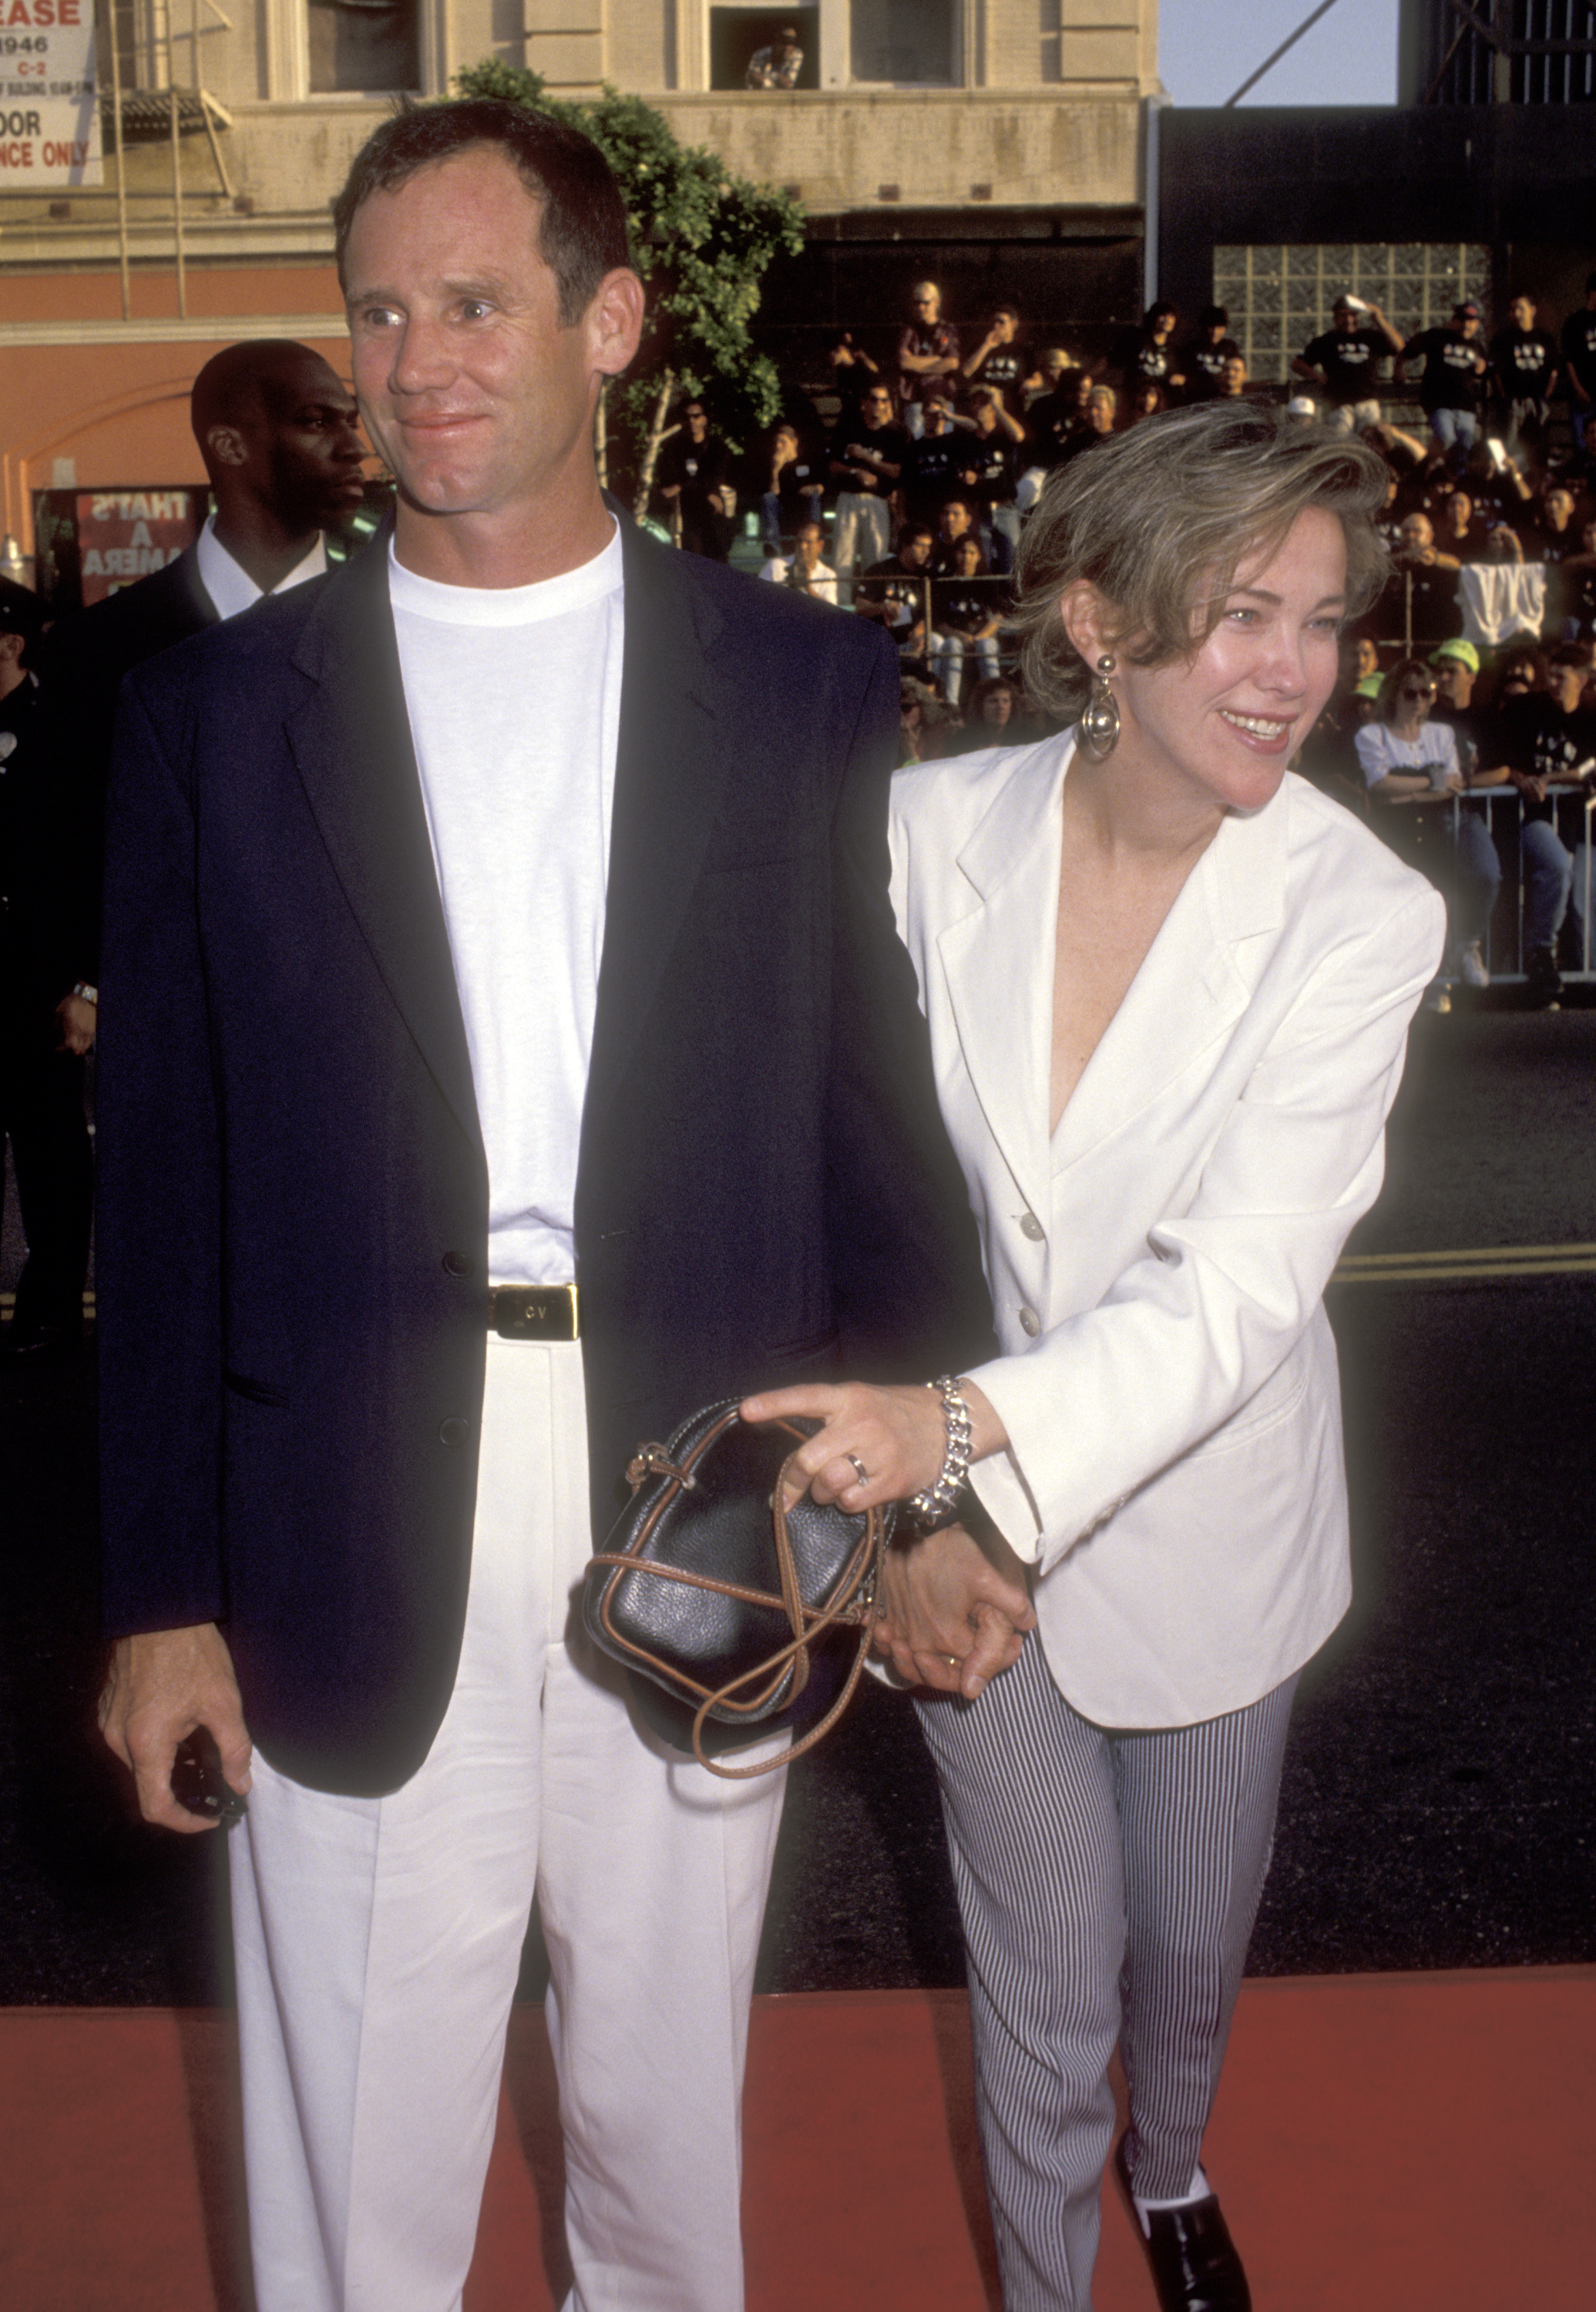 Production designer Bo Welch and his wife Catherine O'Hara attend the "Batman Returns" Hollywood premiere at Mann's Chinese Theatre on June 16, 1992 in Hollywood, California | Source: Getty Images